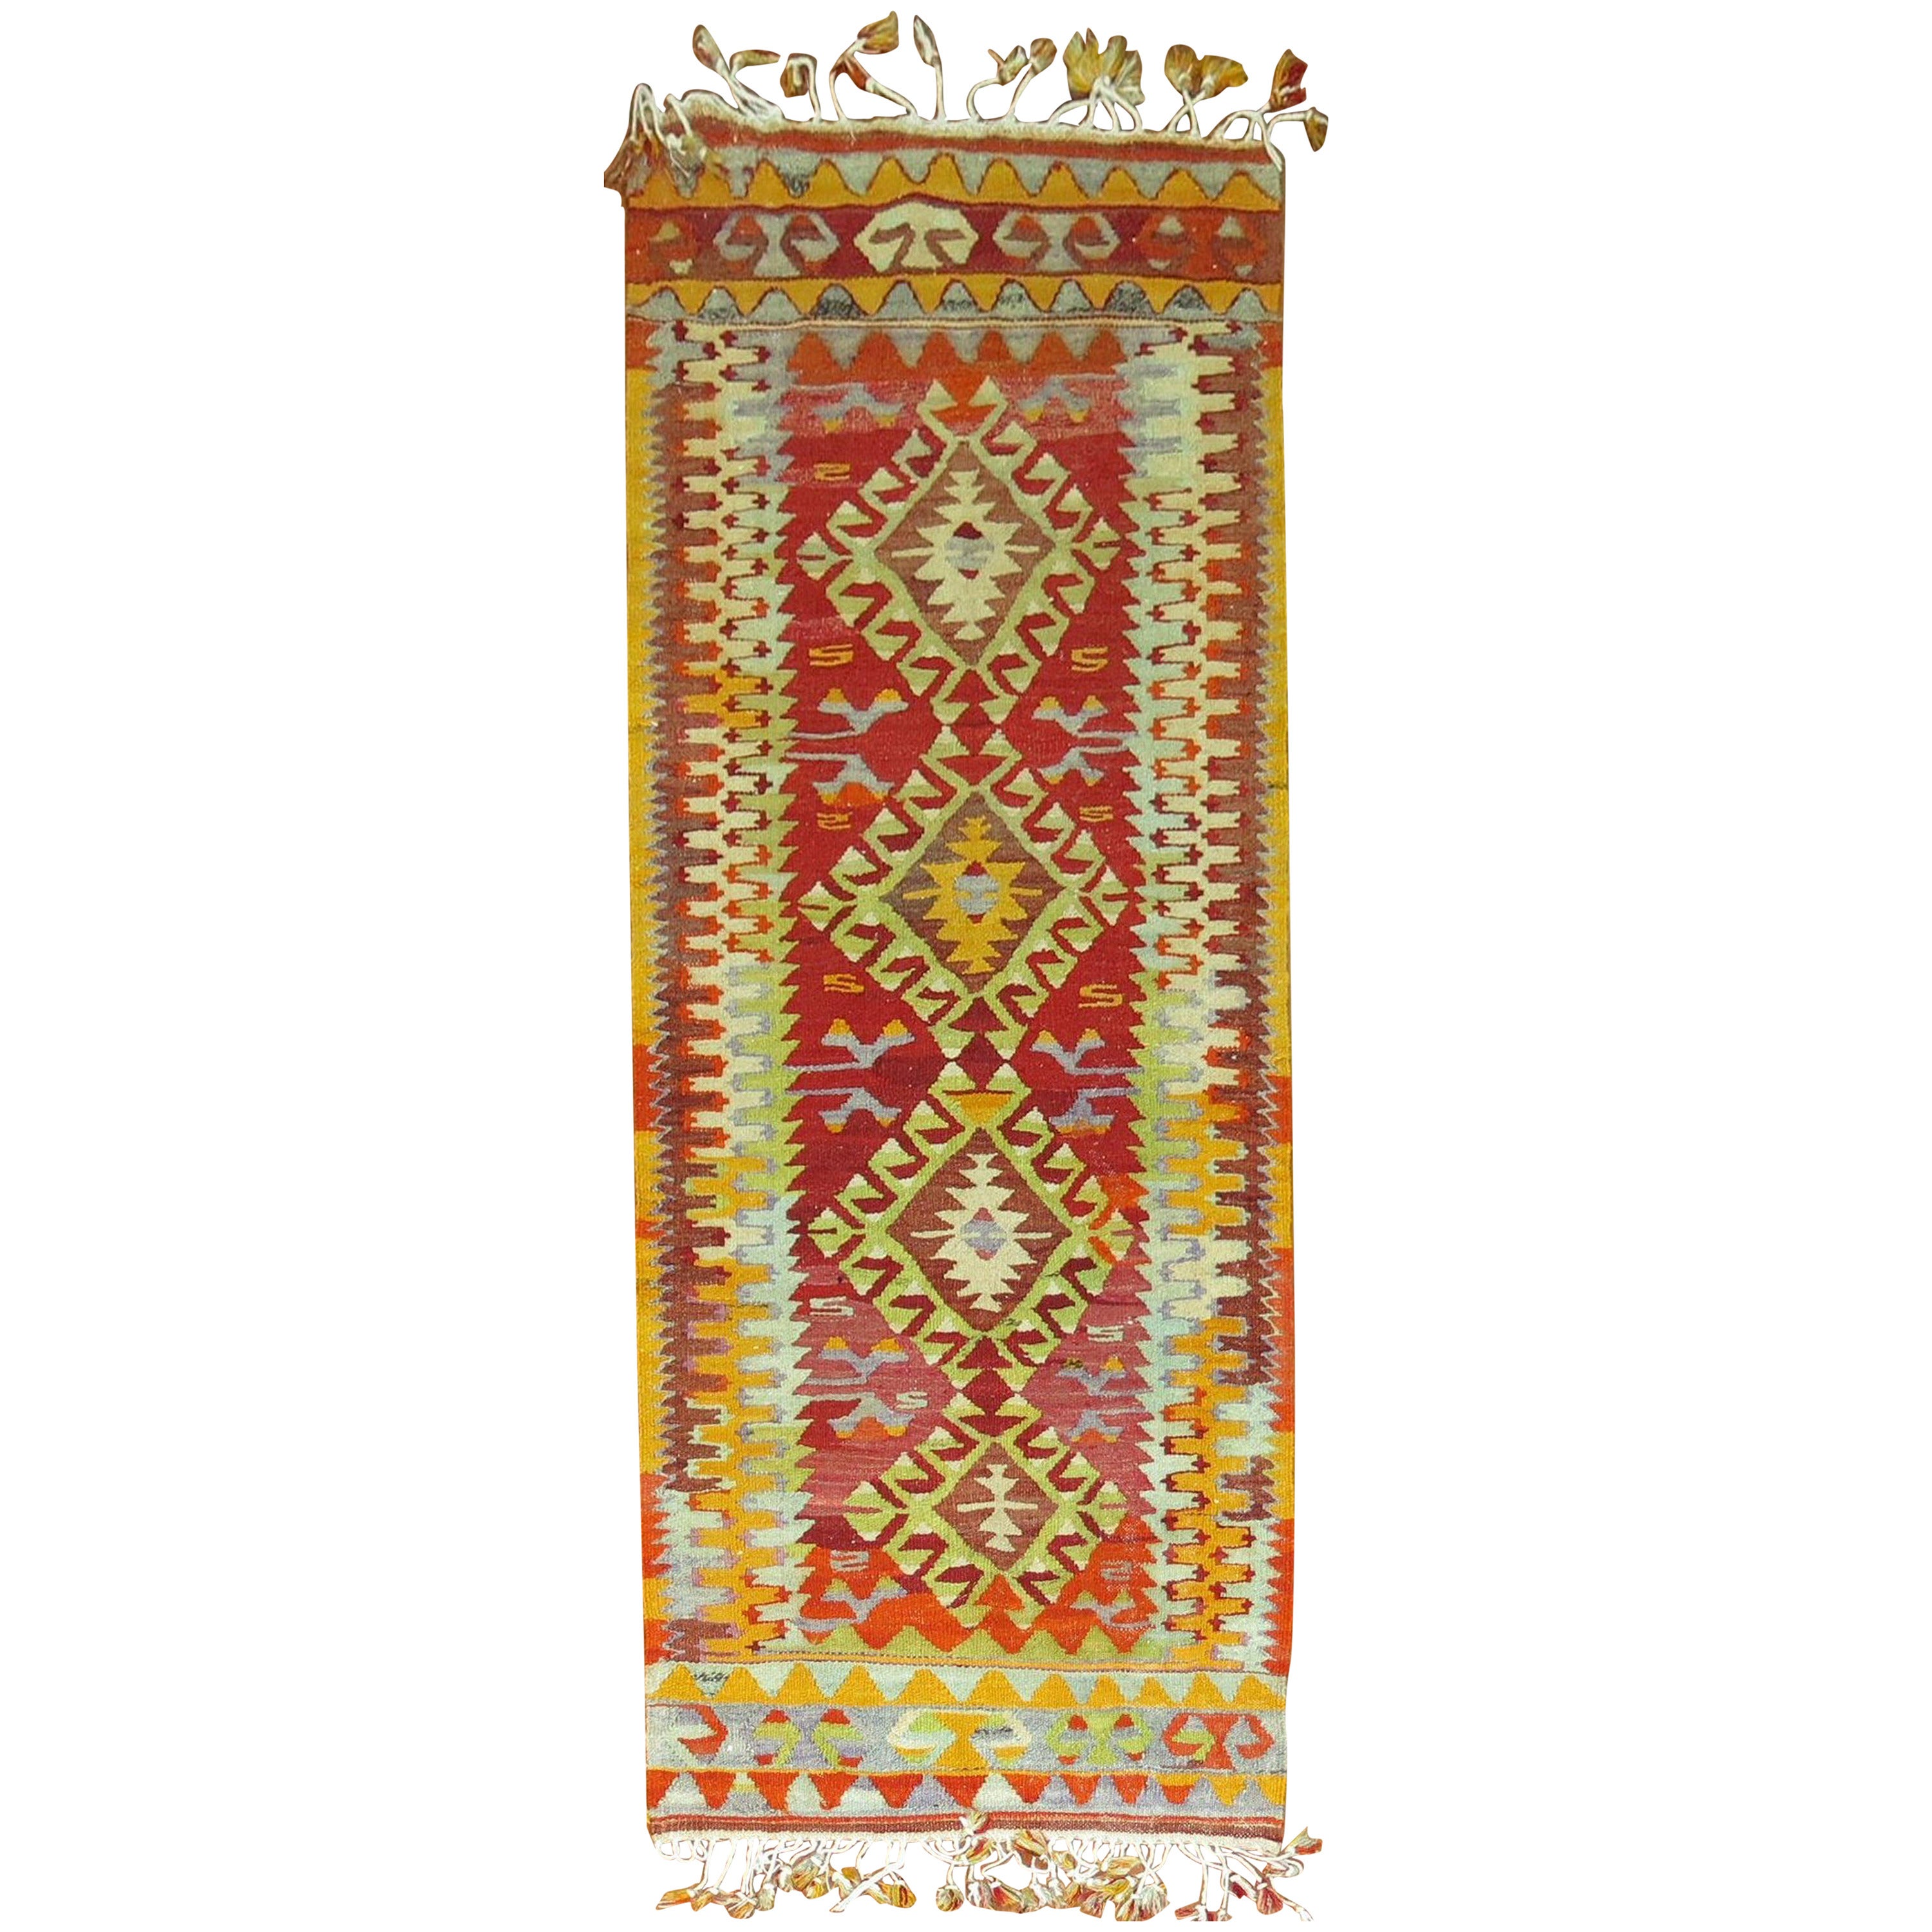 Narrow Kilim Runner in Bright Red and Green